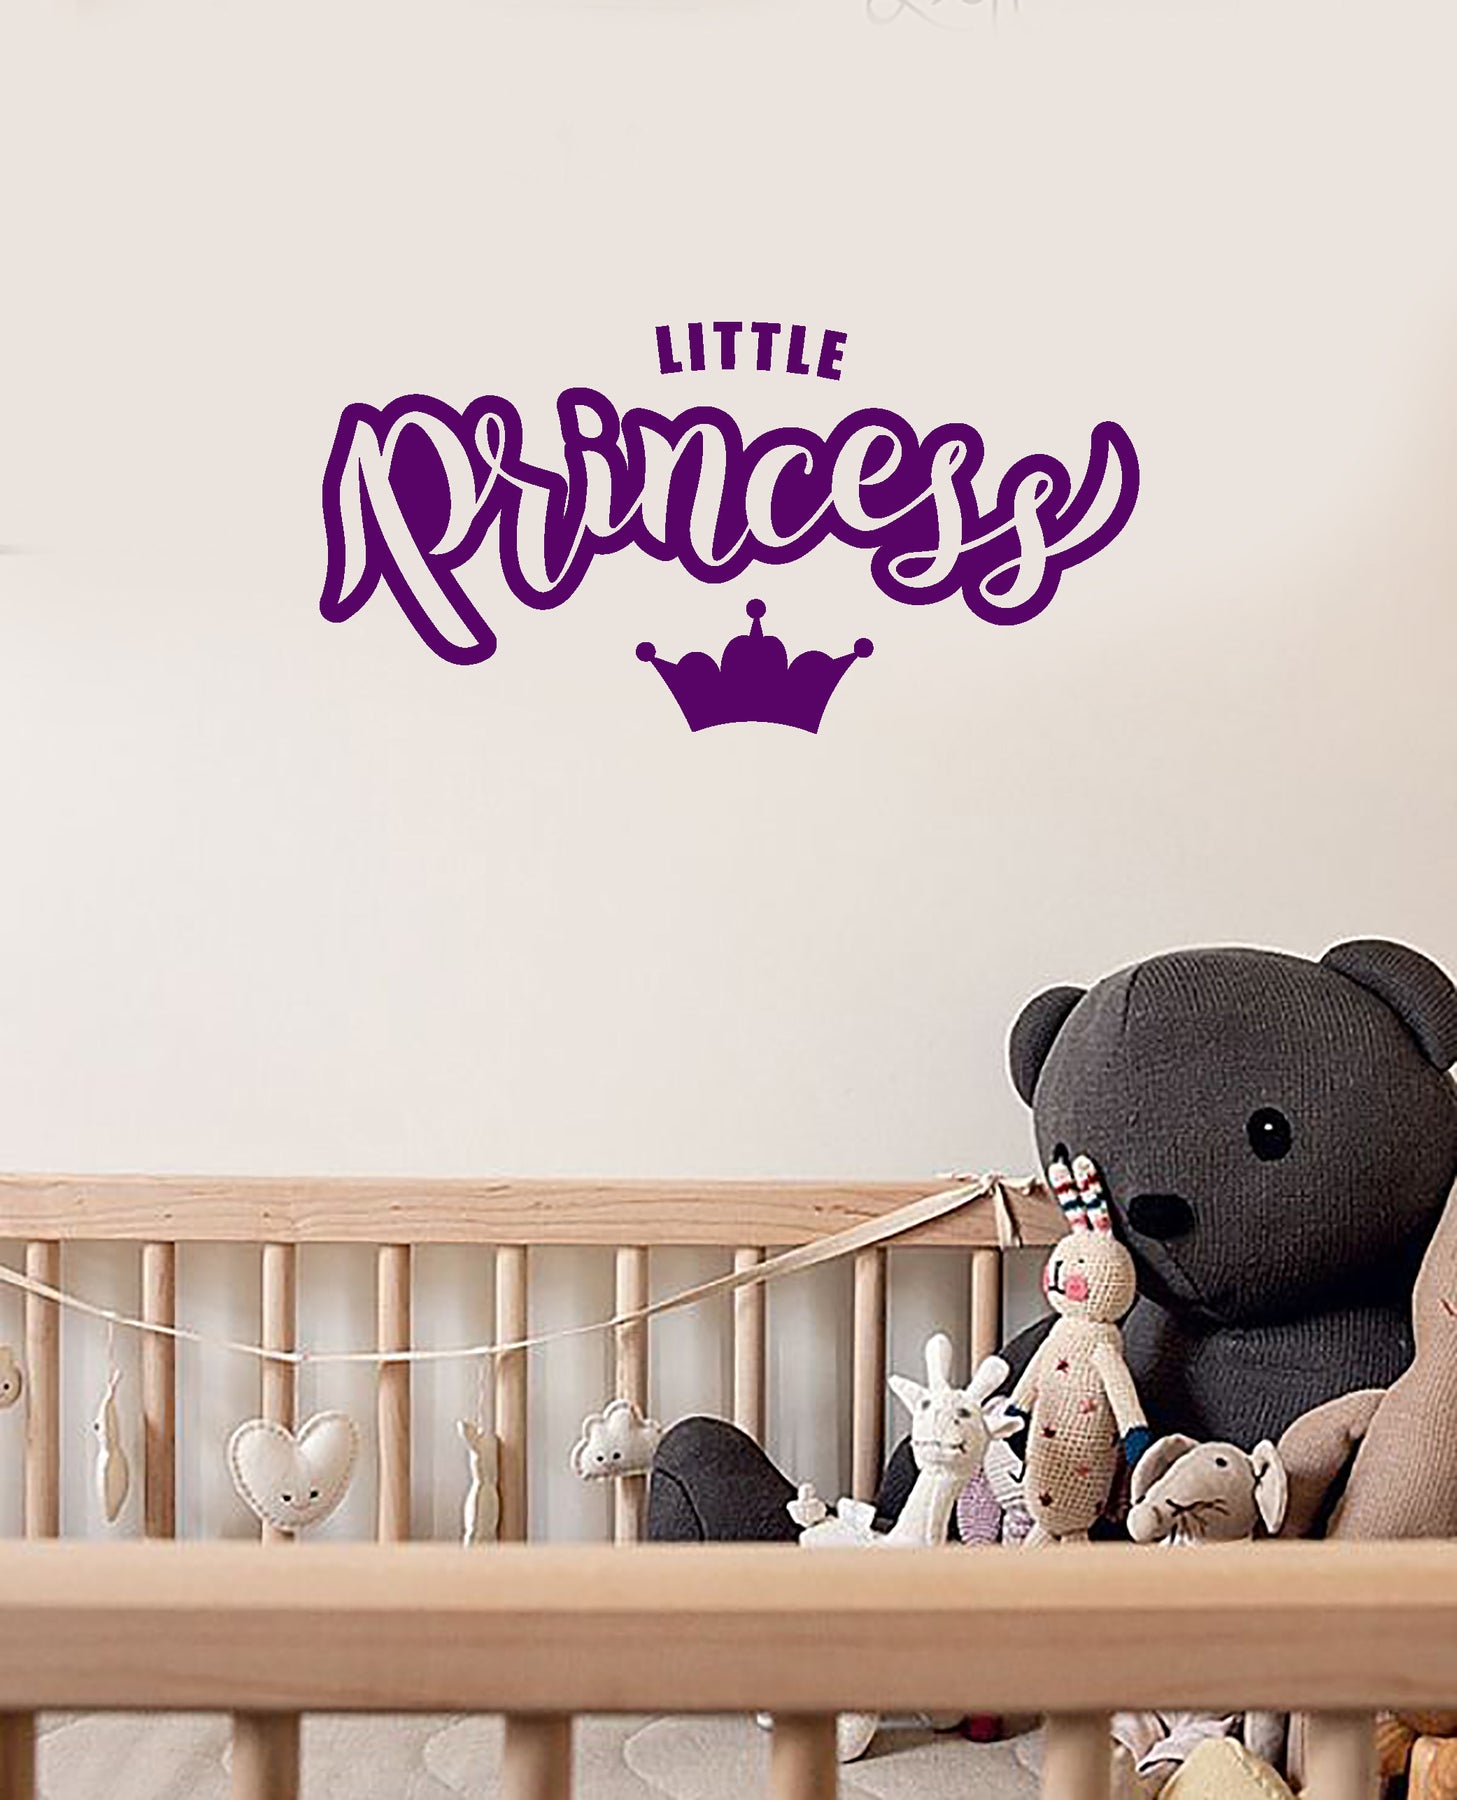 Our Little Princess Nursery Children S Bedroom Decal Wall